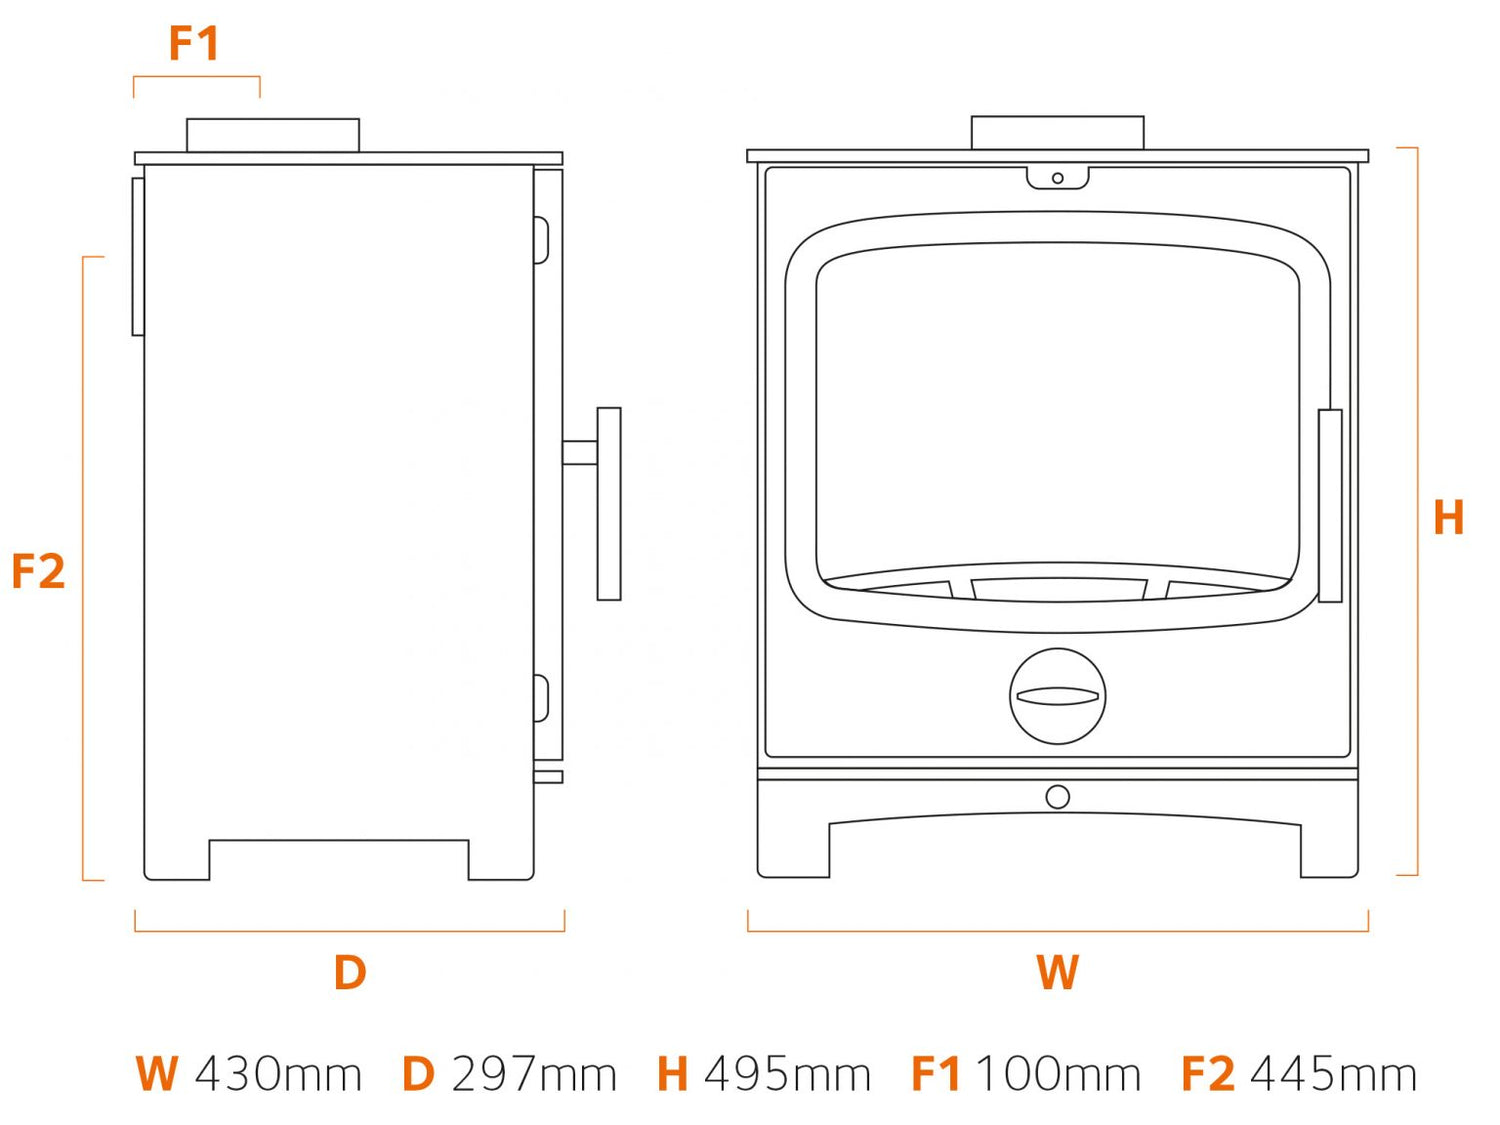 Dimensions and specifications for the Stubby 5 Multifuel stove